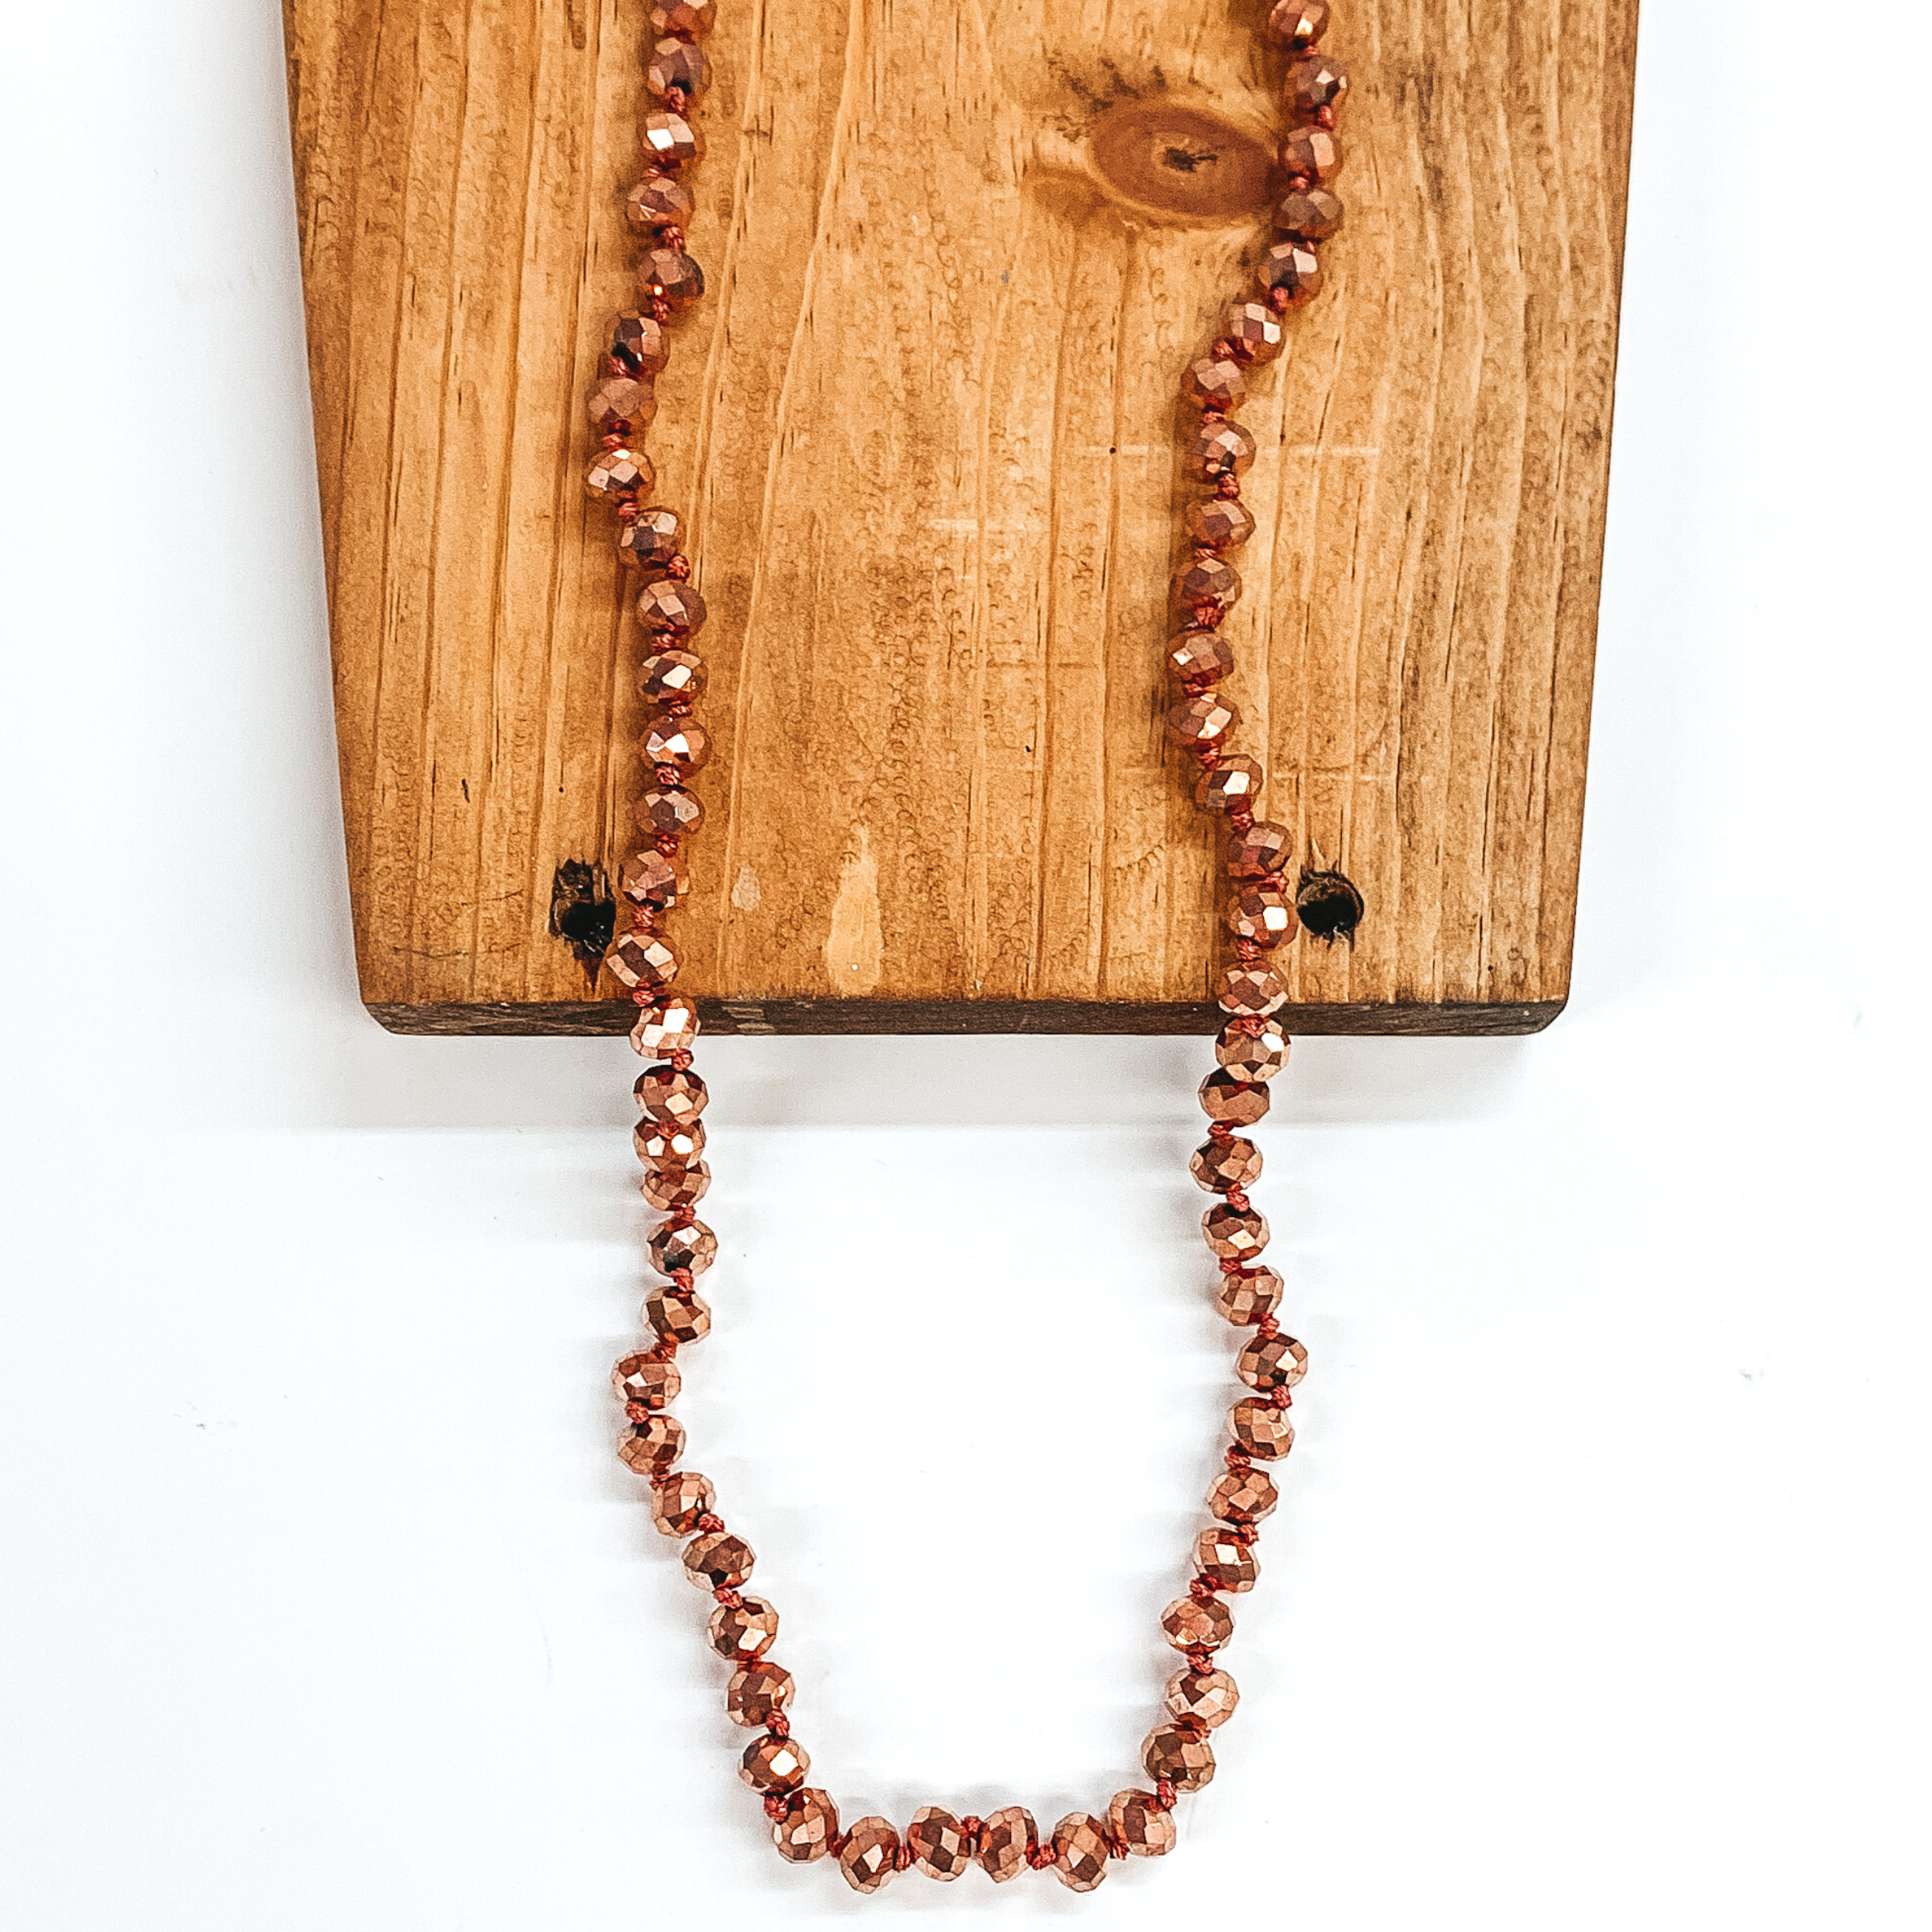 Rose gold crystal beaded necklace. This necklace is pictured on a brown block on a white background.